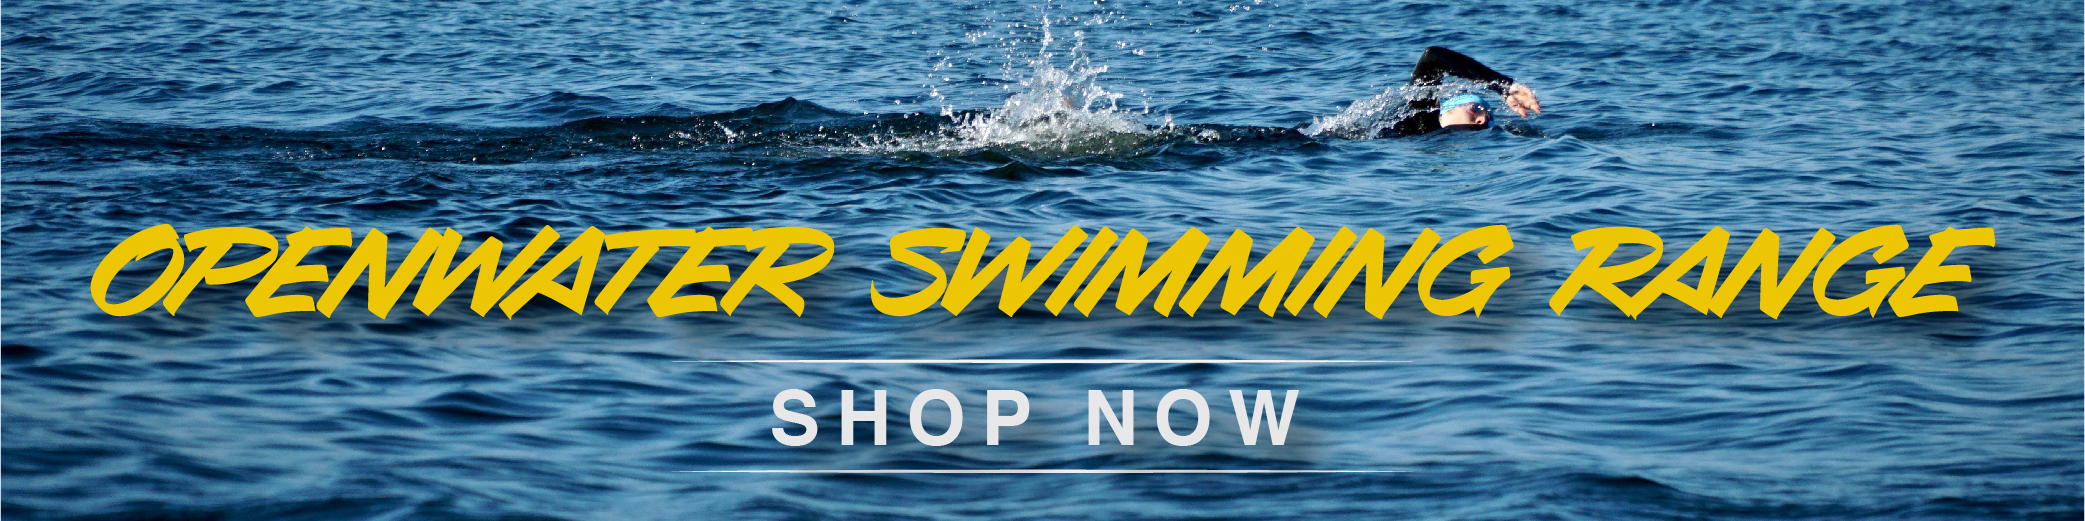 Northern Divers Open Water Swimming Product Range